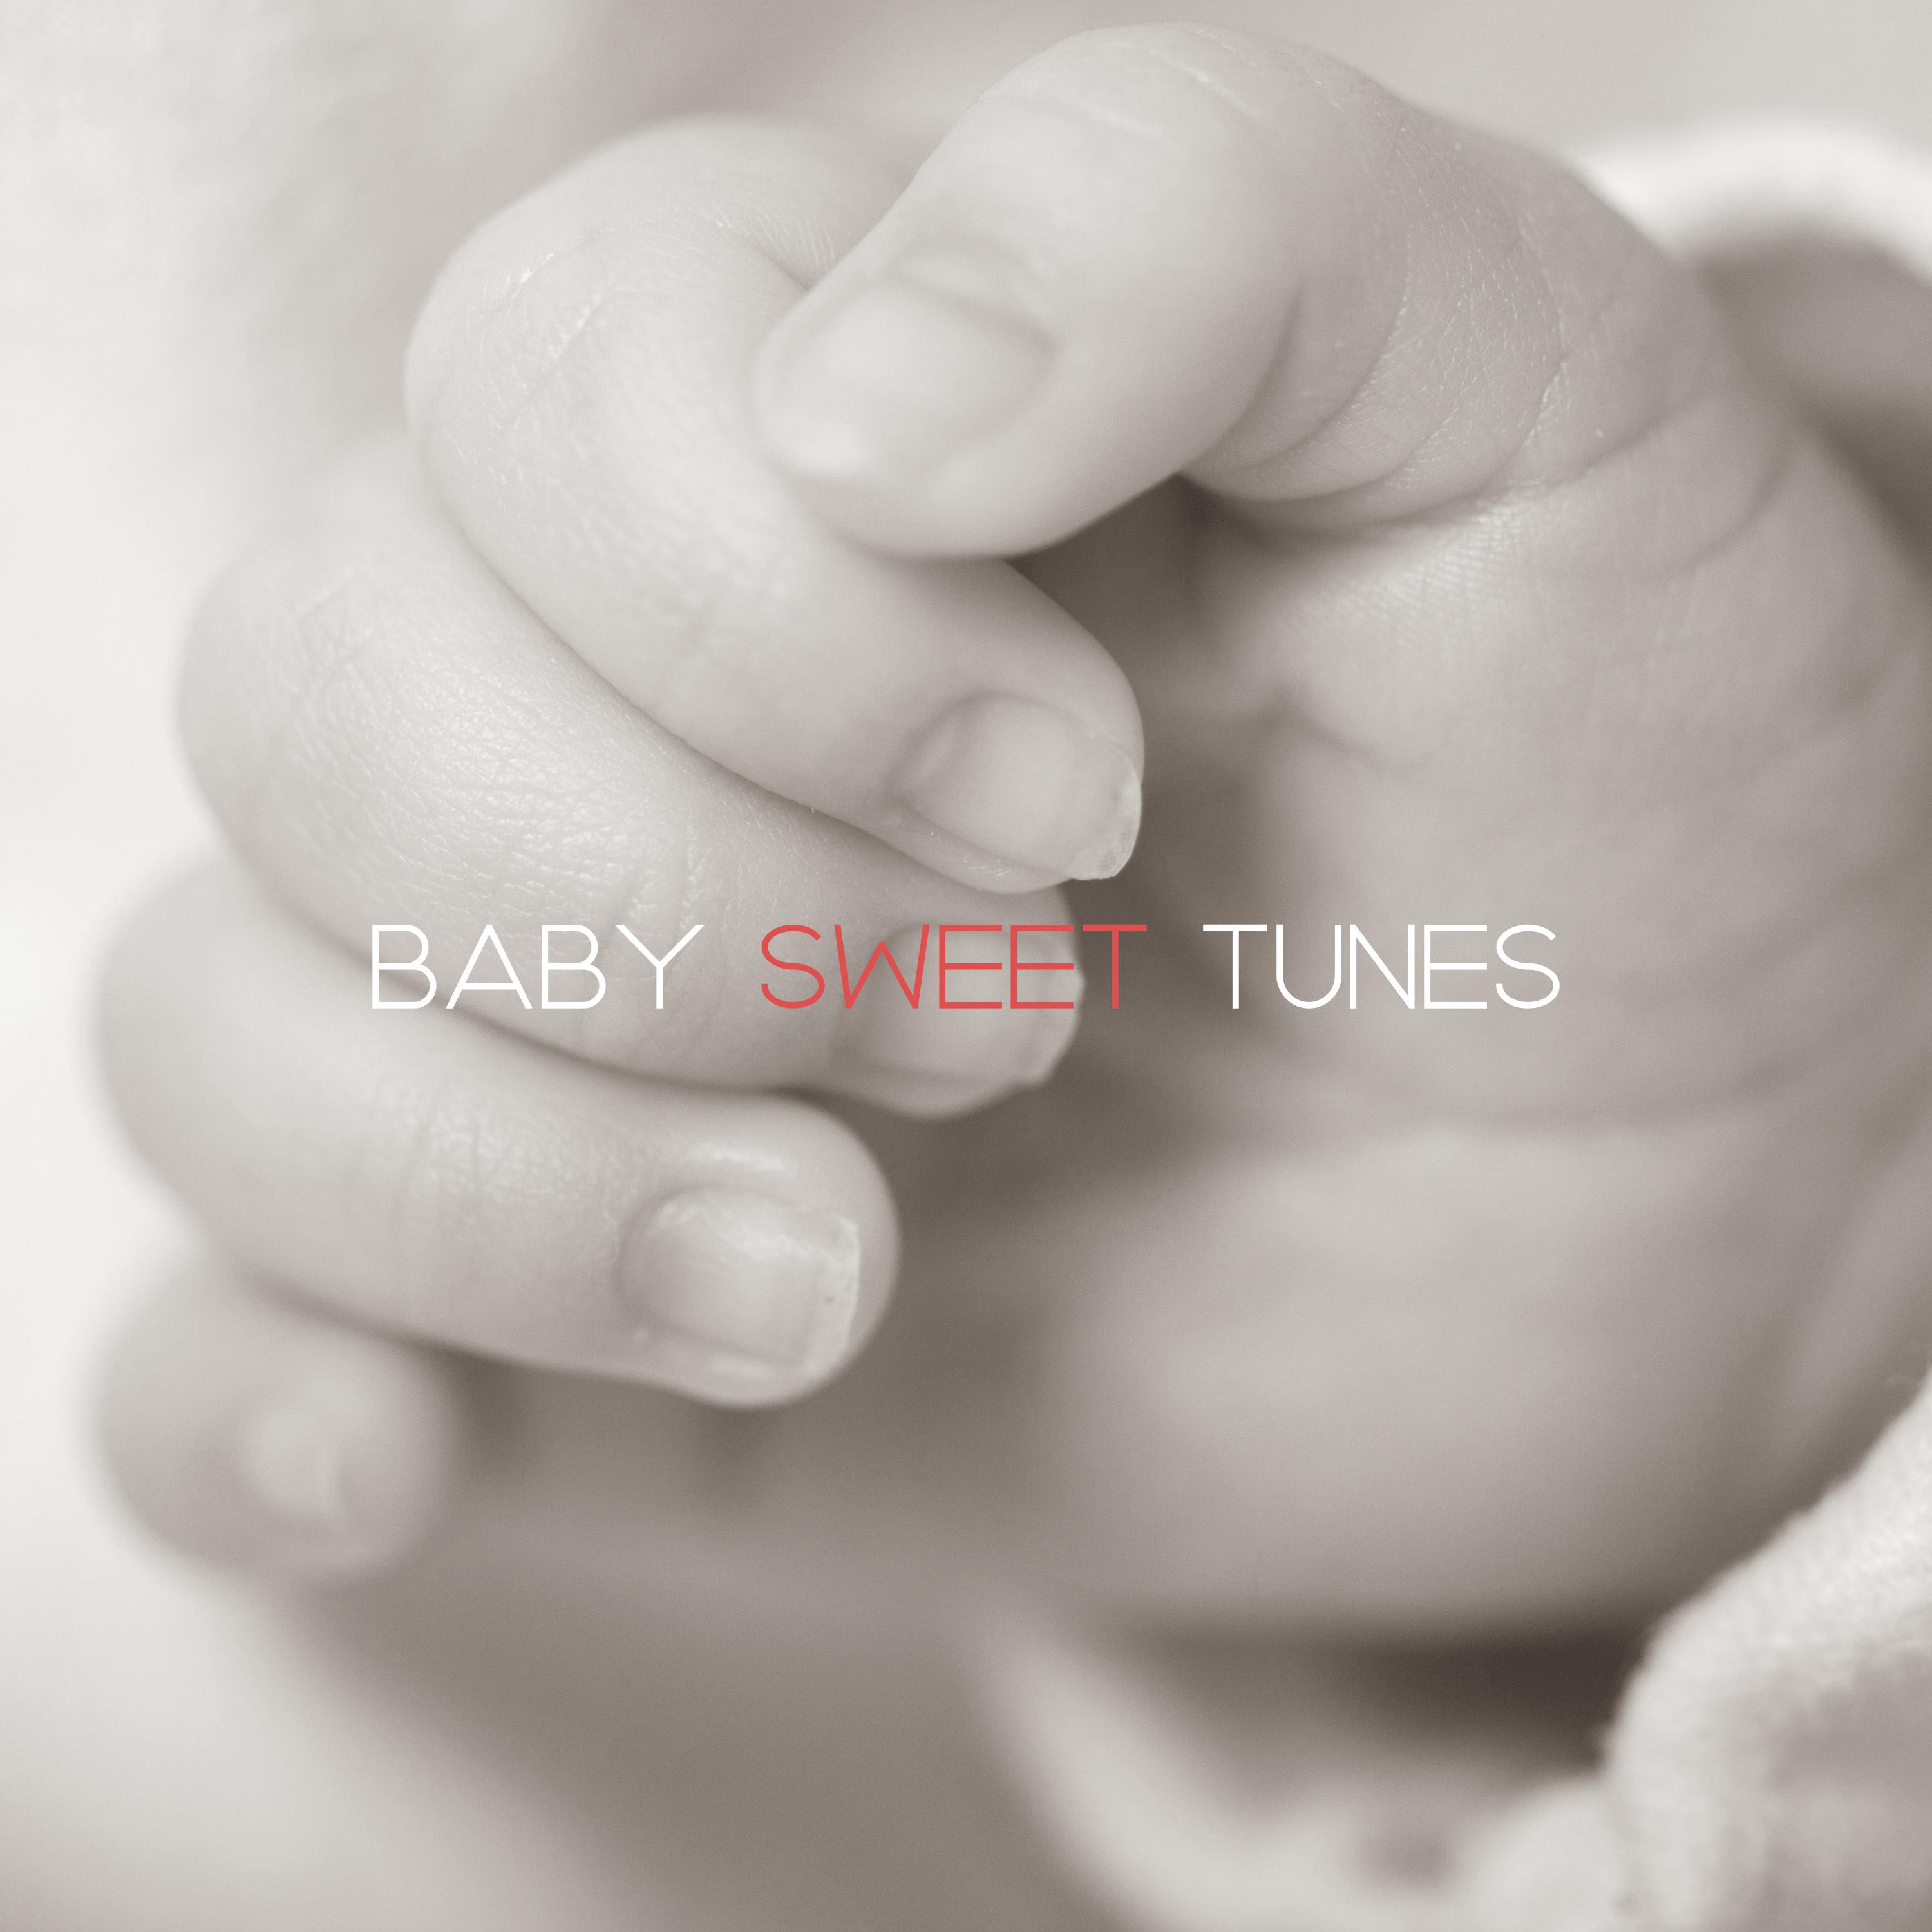 Baby Sweet Tunes: Cradle Songs, Relaxed Baby, Relaxing Music for Kids, Calming Lullabies, Relaxation for Babies